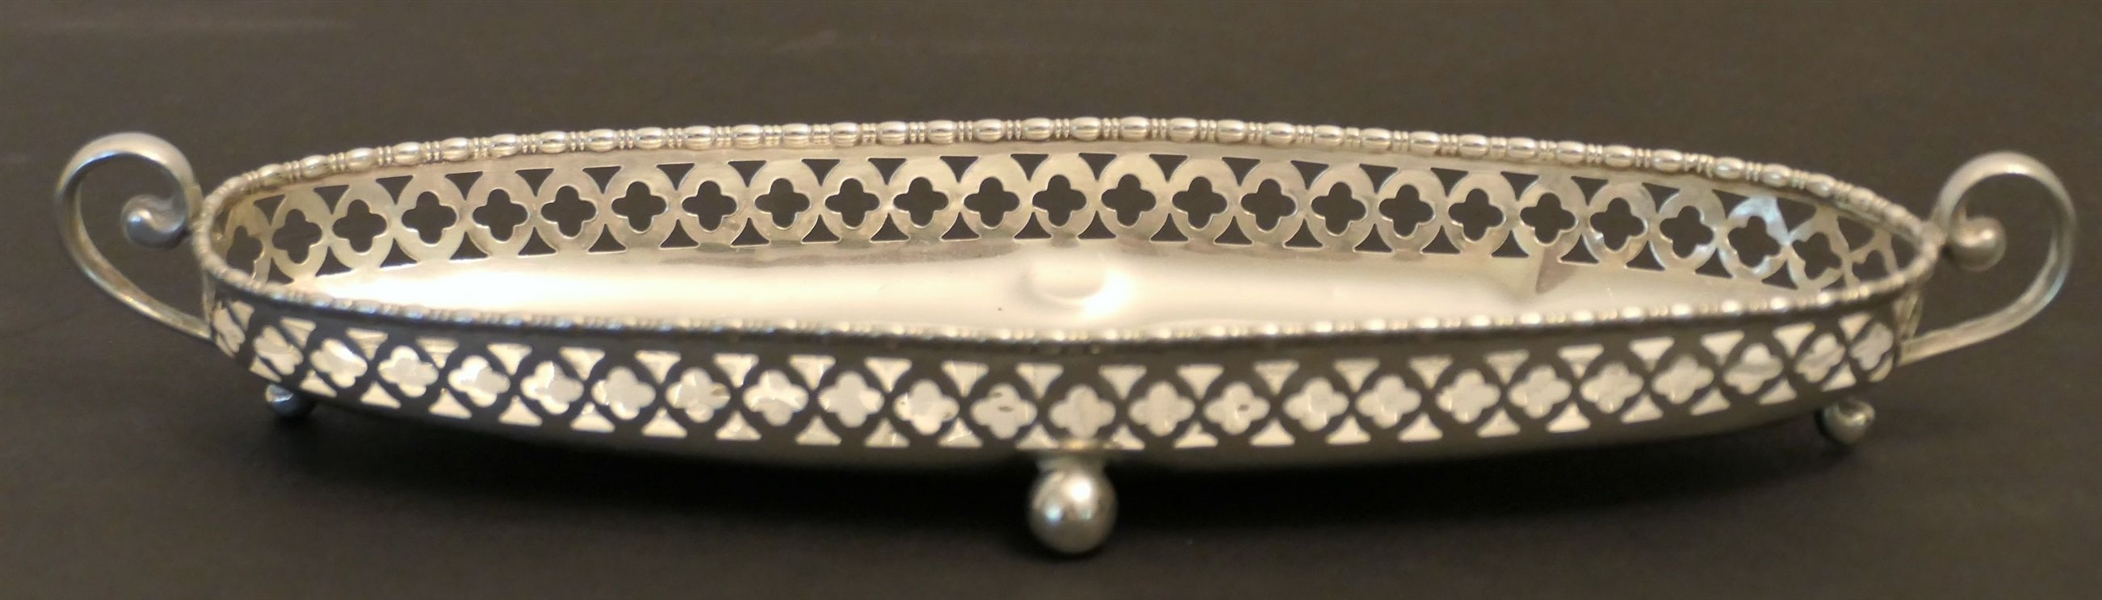 Hester Billings & Son New York Sterling Silver Oval Dish with Pierced Edges - Marked 245 1/2X - Measures 8" by 2 1/2" 